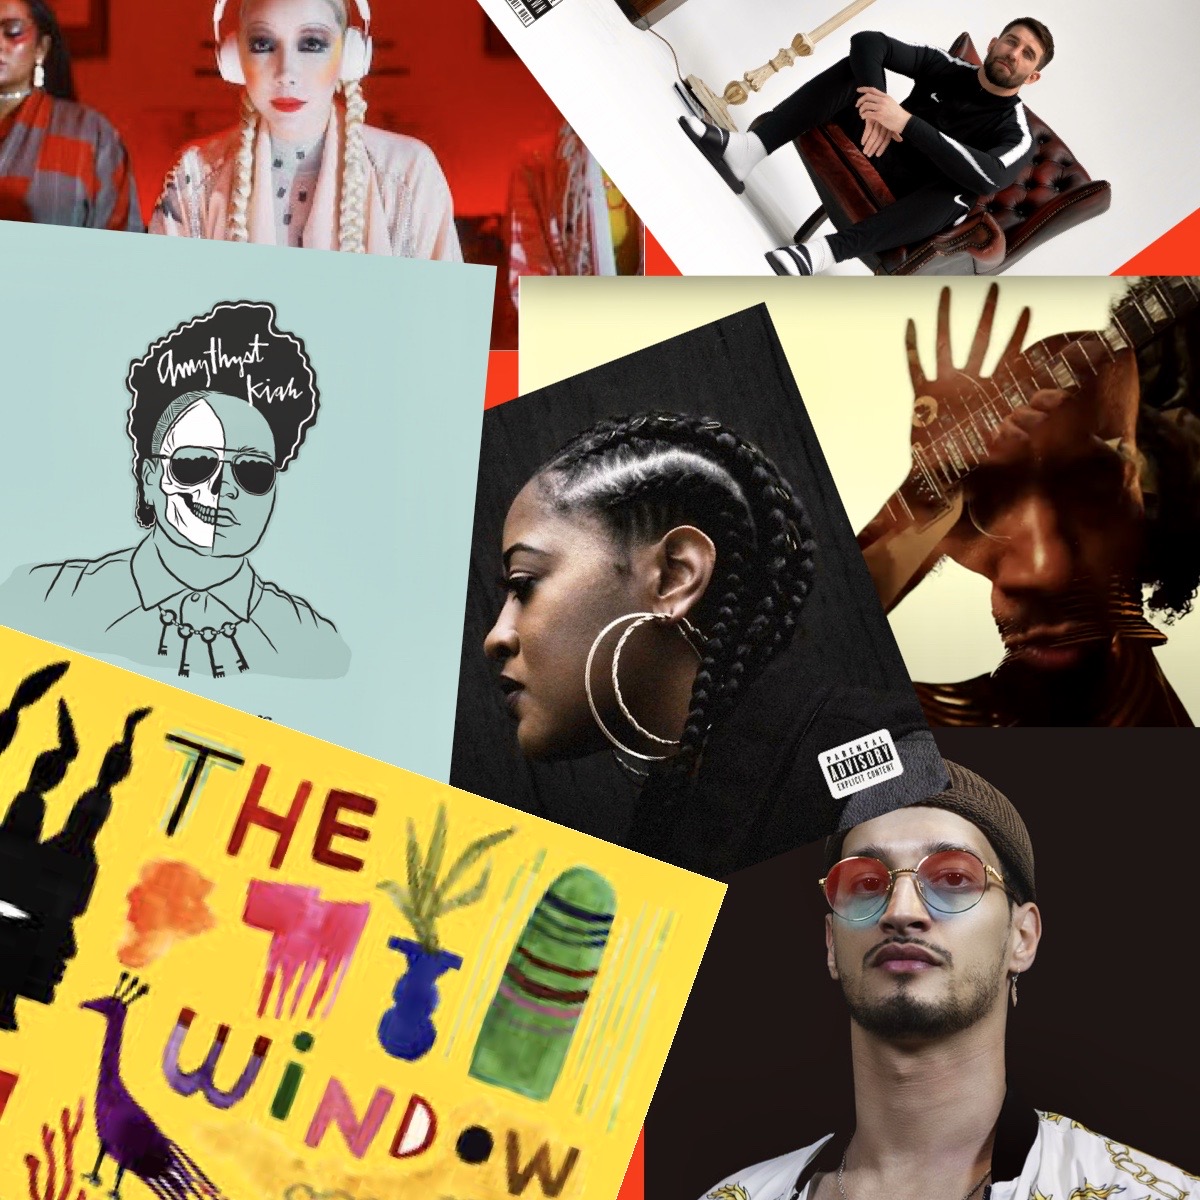 Various cover artworks and photos of albums and artists of color stylized like a collage